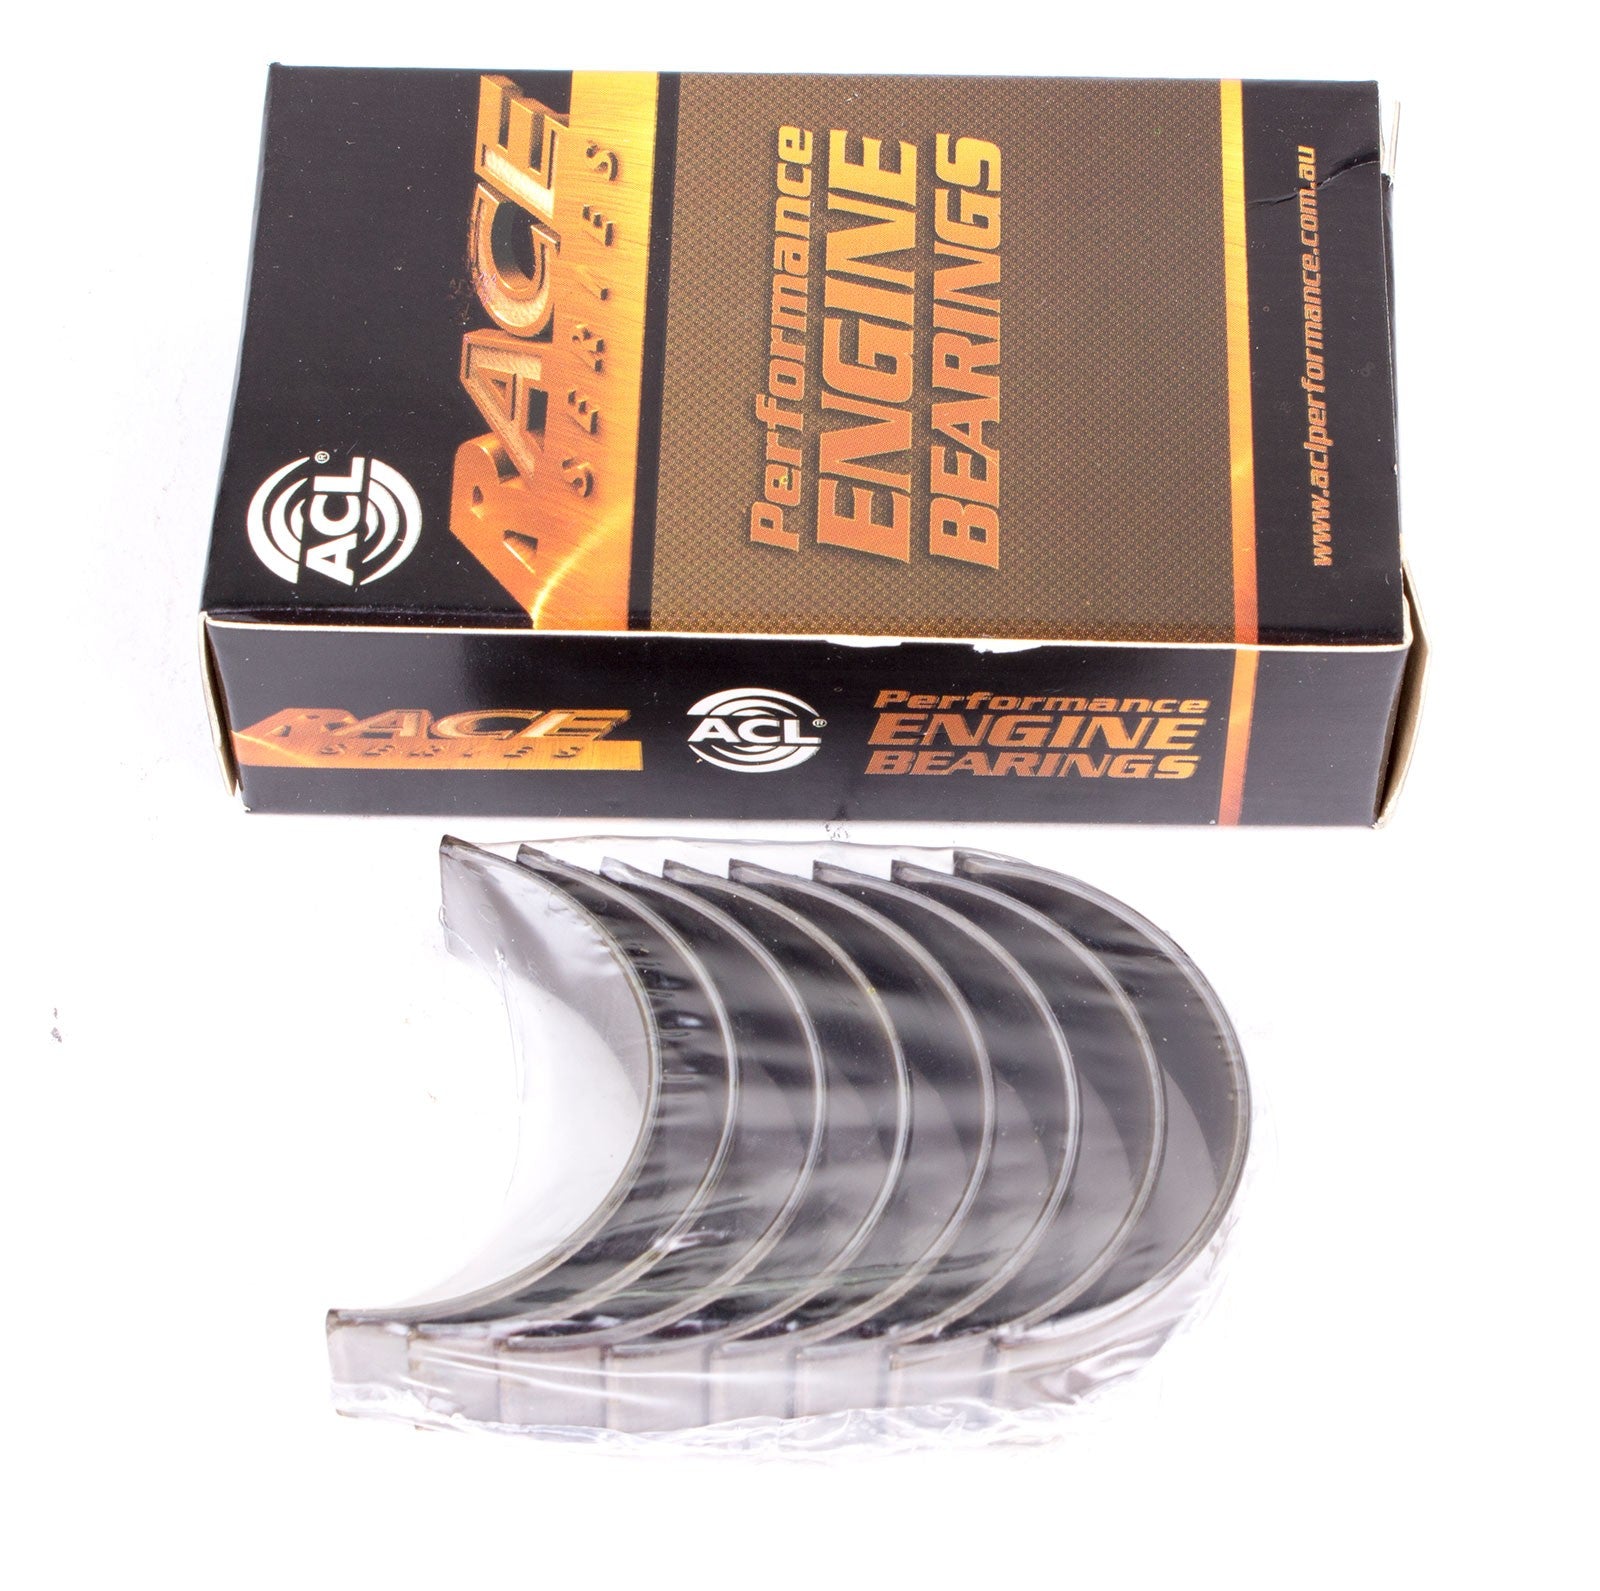 ACL 5M2152H-001 Main bearing set (ACL Race Series) Photo-0 